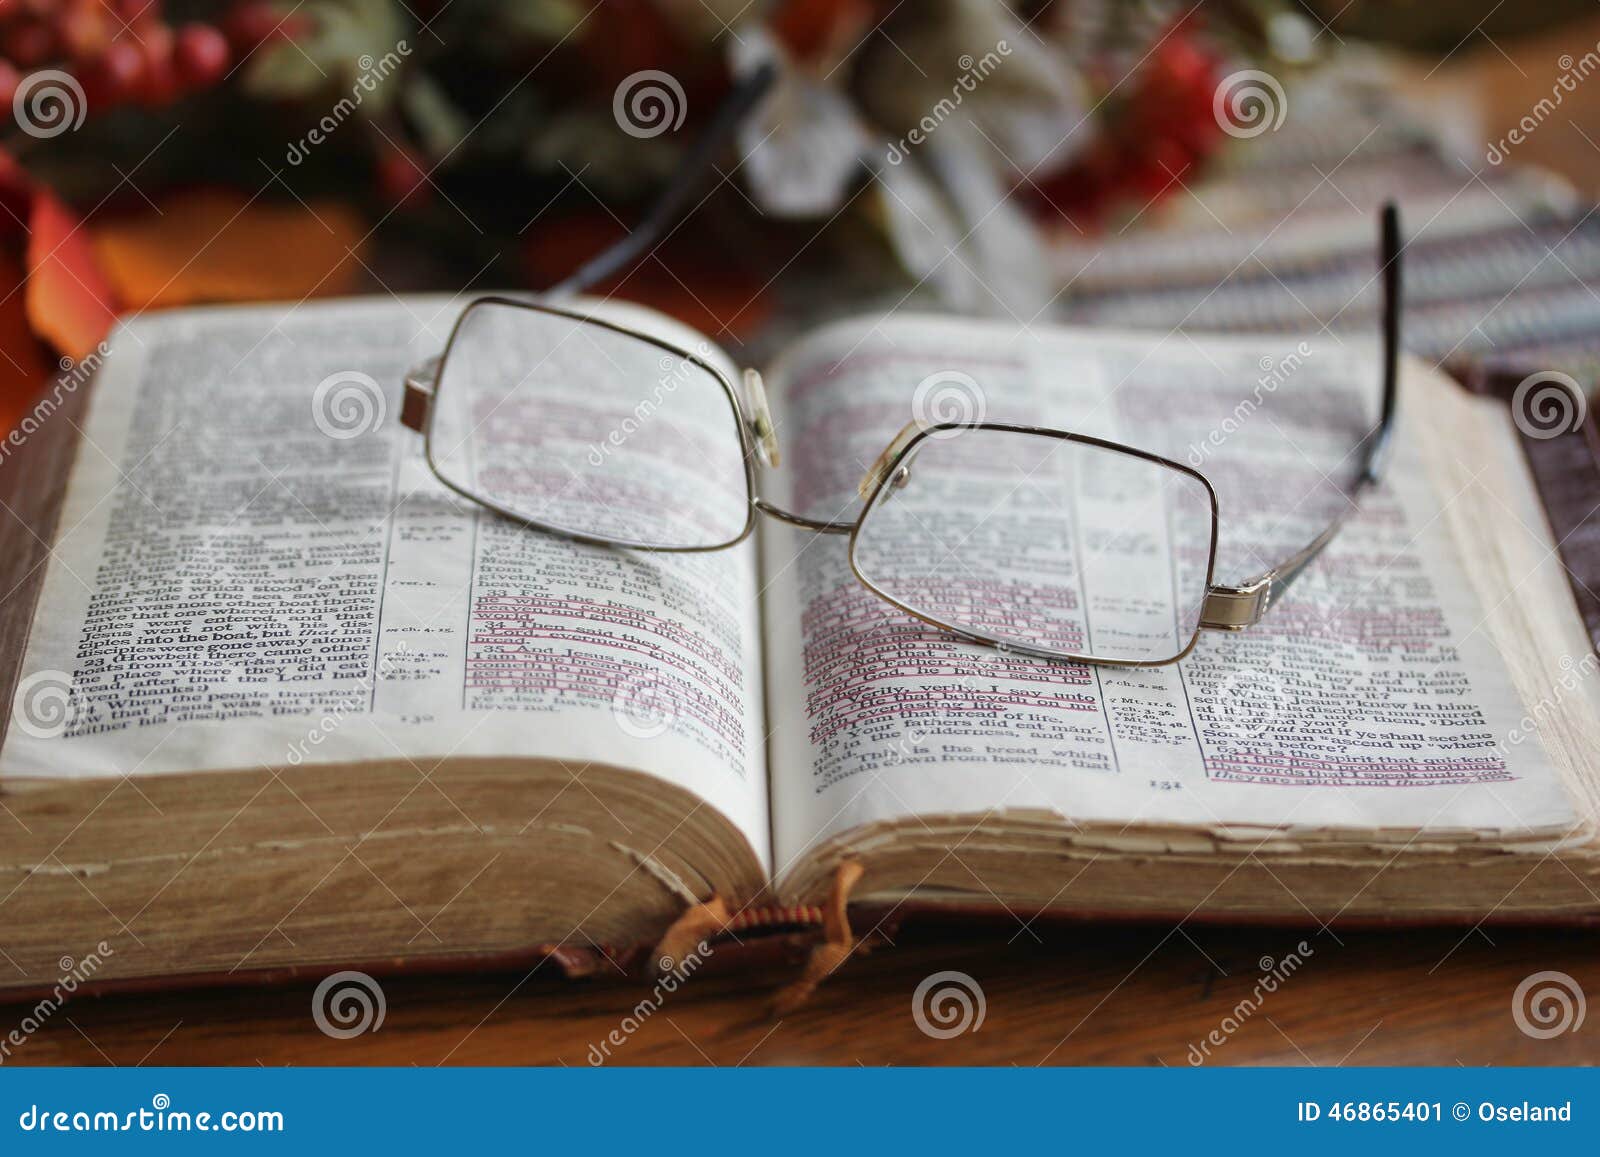 worn open bible with glasses